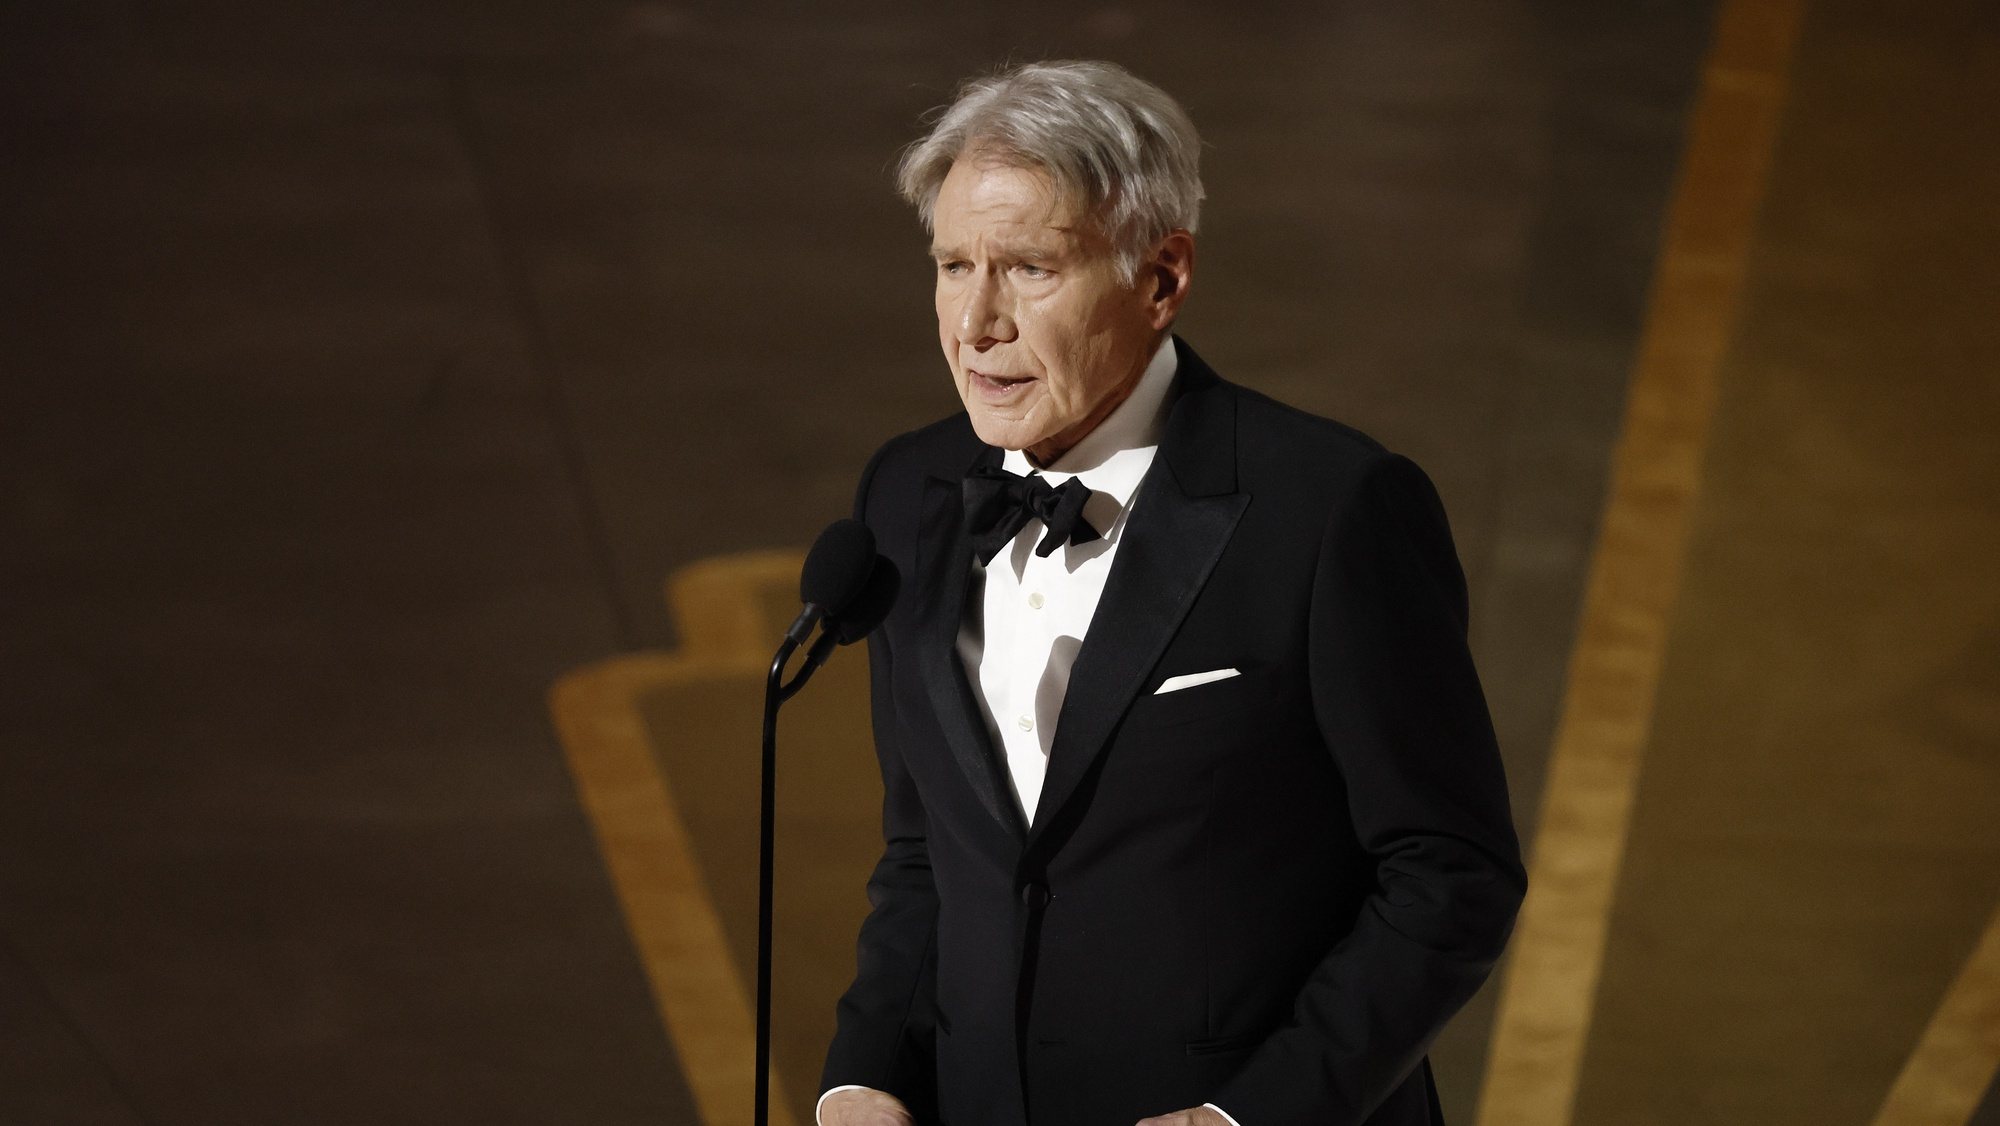 epa10519112 Harrison Ford during the 95th annual Academy Awards ceremony at the Dolby Theatre in Hollywood, Los Angeles, California, USA, 12 March 2023. The Oscars are presented for outstanding individual or collective efforts in filmmaking in 24 categories.  EPA/ETIENNE LAURENT